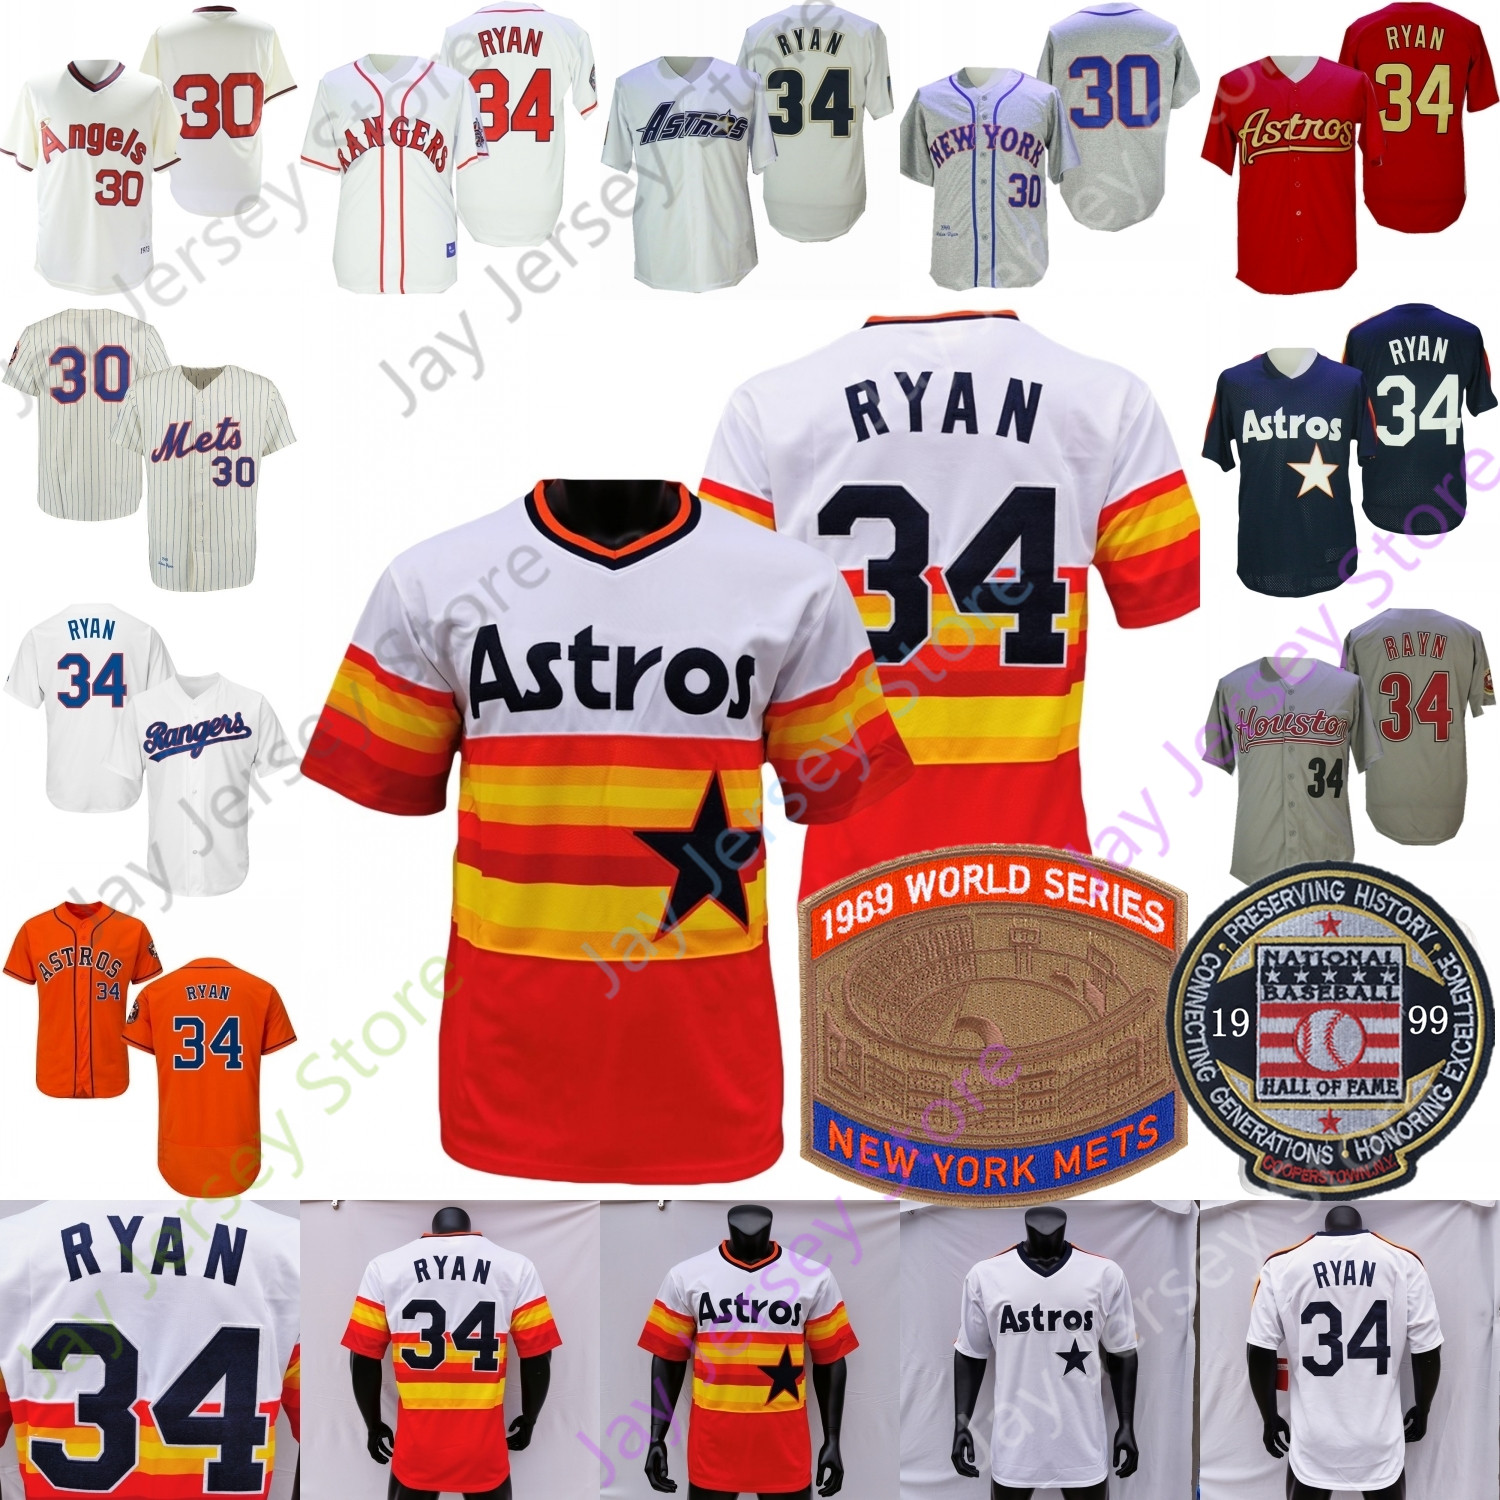 Nolan Ryan Jersey Rainbow Vintage 1969 WS 1994 1973 Gream Cooperstown Grey Turn Back Navy Mesh BP 1999 Hall Of Fame Patch Size S-3XL